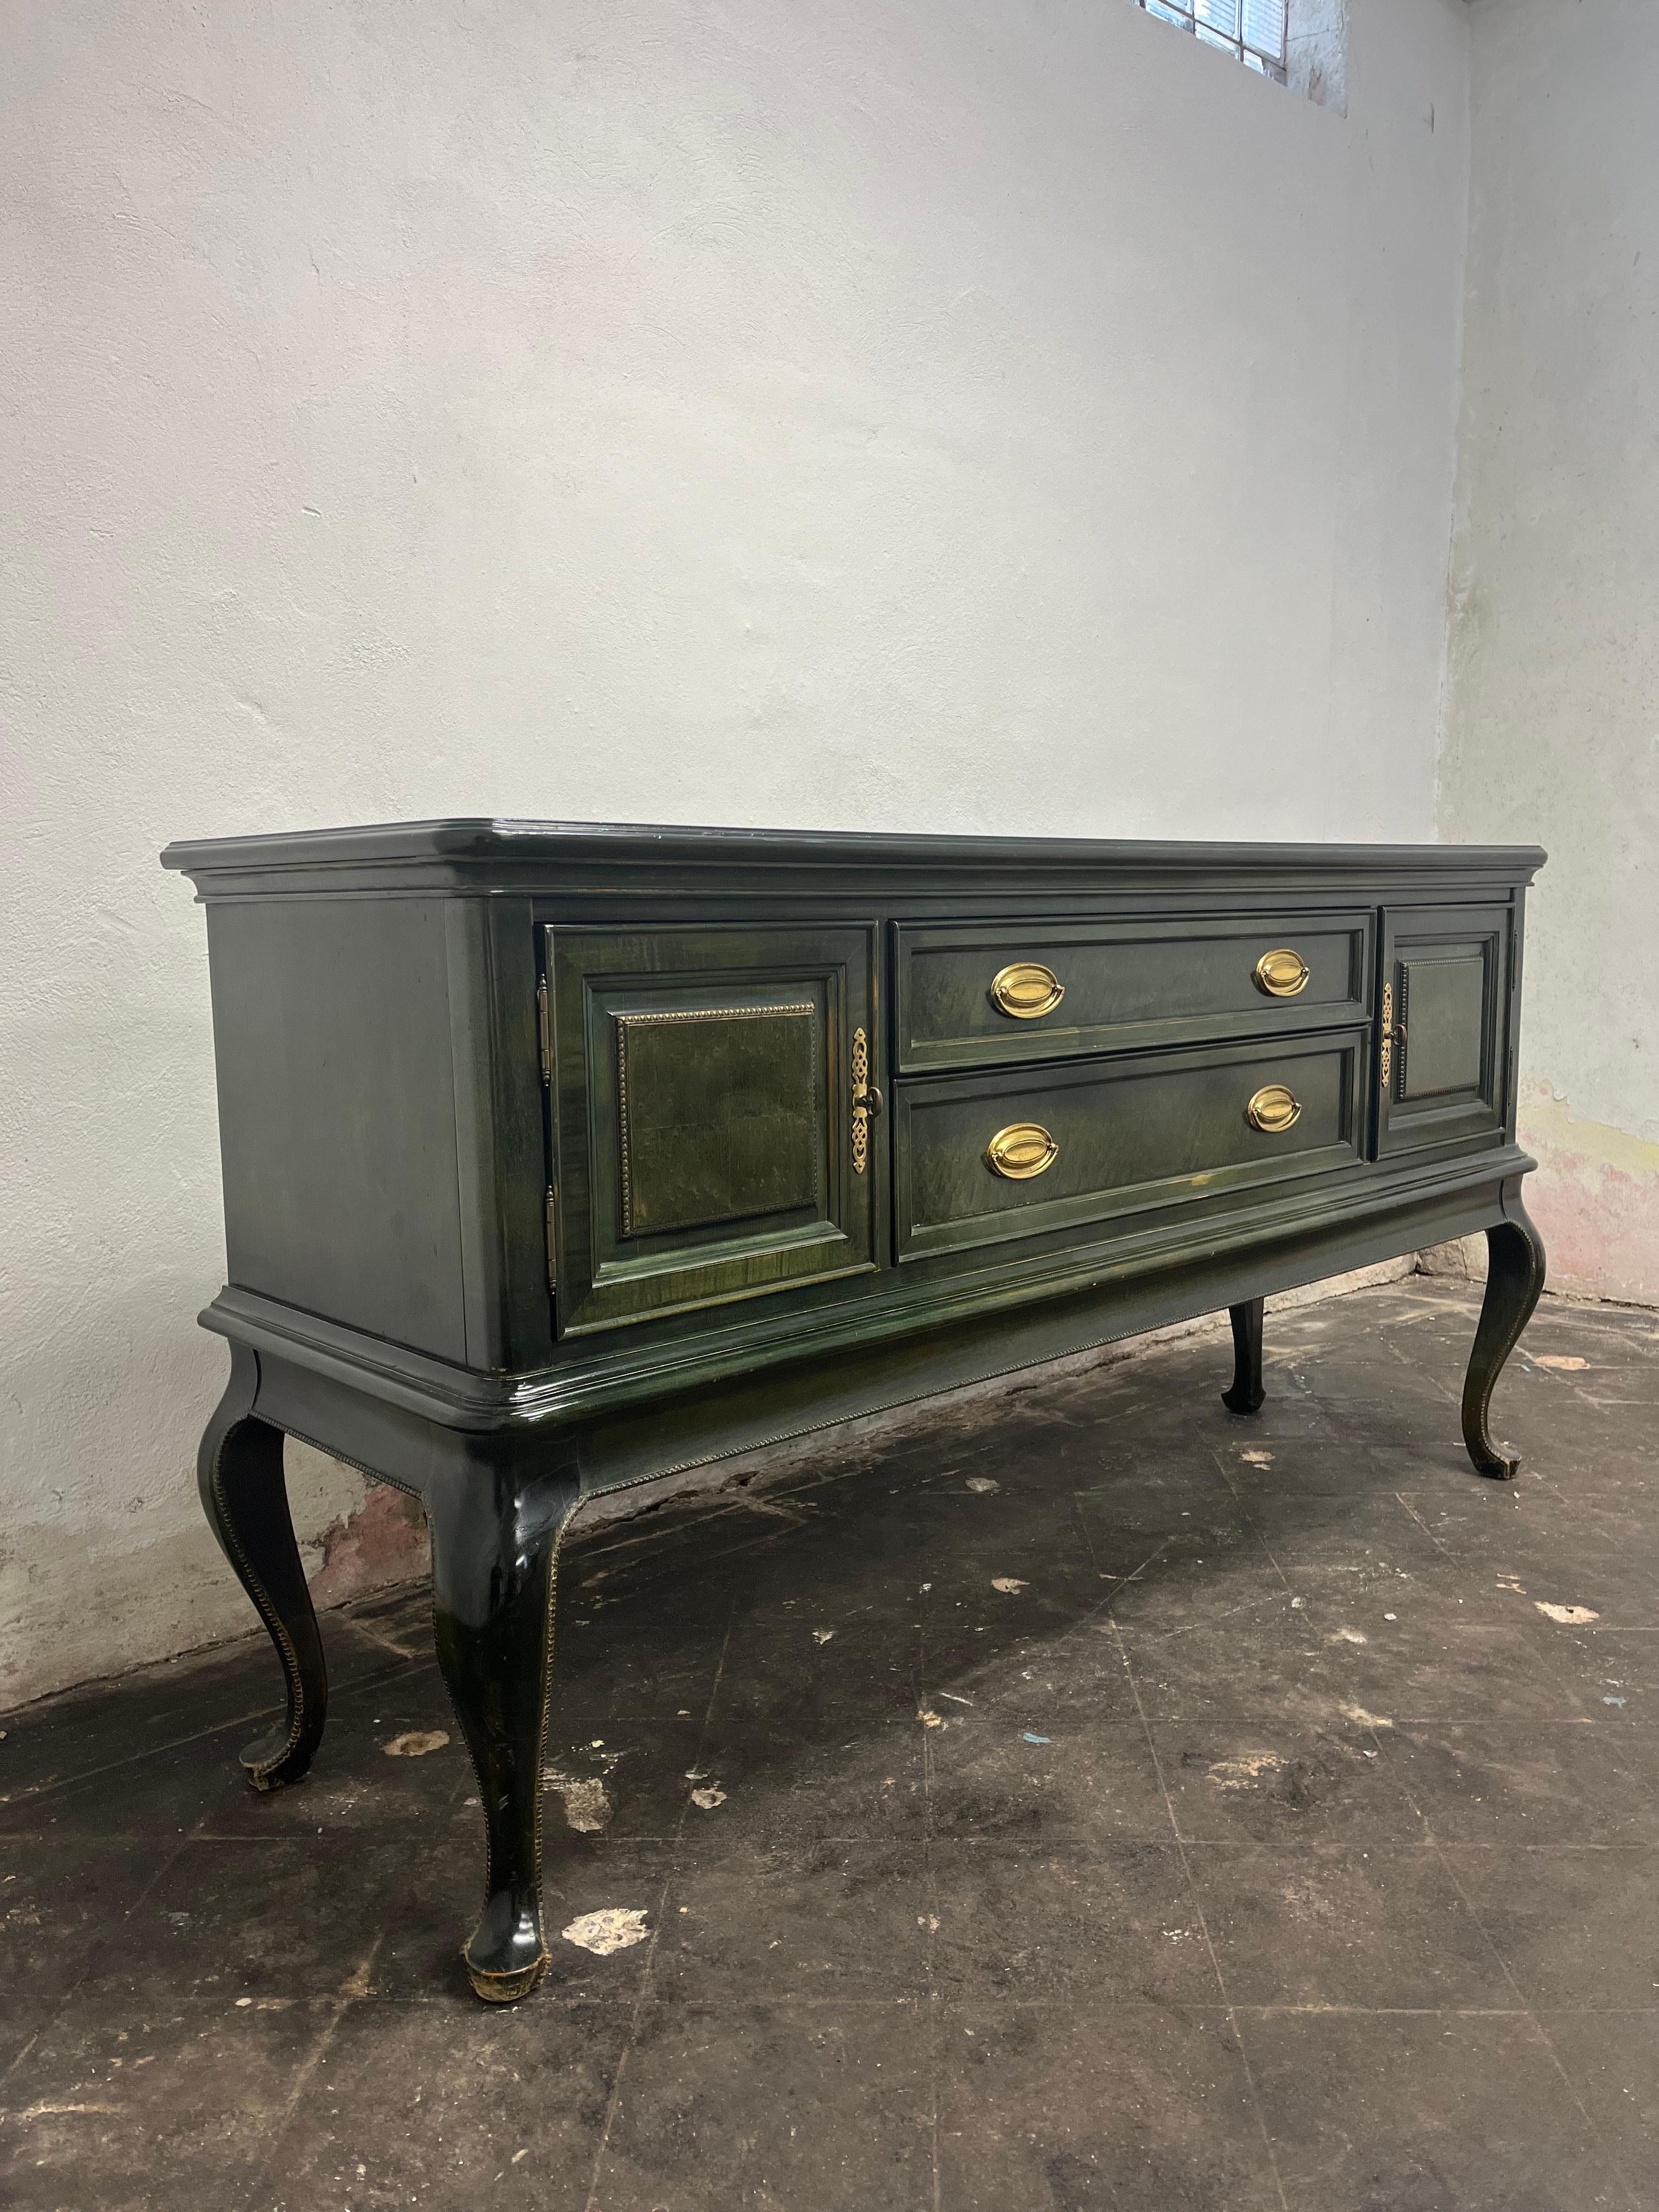 Unique Green buffet by Bernhardt. Green stain with high gloss lacquer finish.  Brass hardware. Fantastic cabriole legs with beaded accent. Large piece with ample storage. 
Curbside to NYC/Philly $450